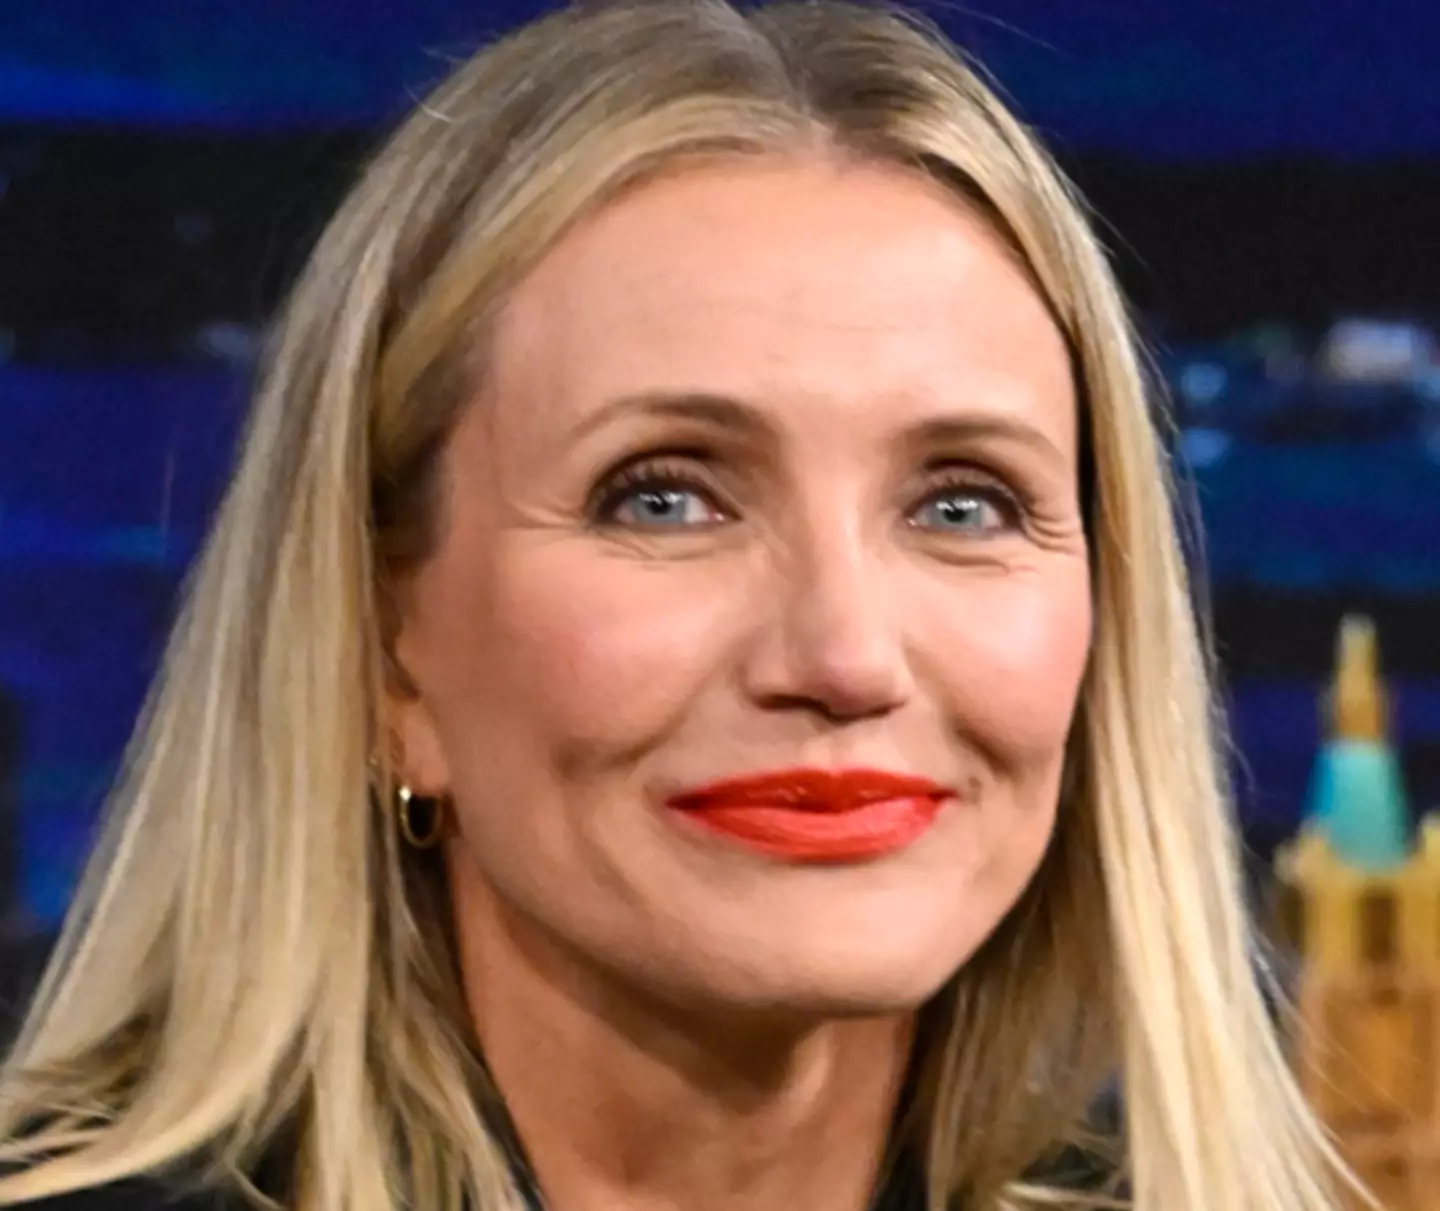 Cameron Diaz pointed out sex is 'natural'.